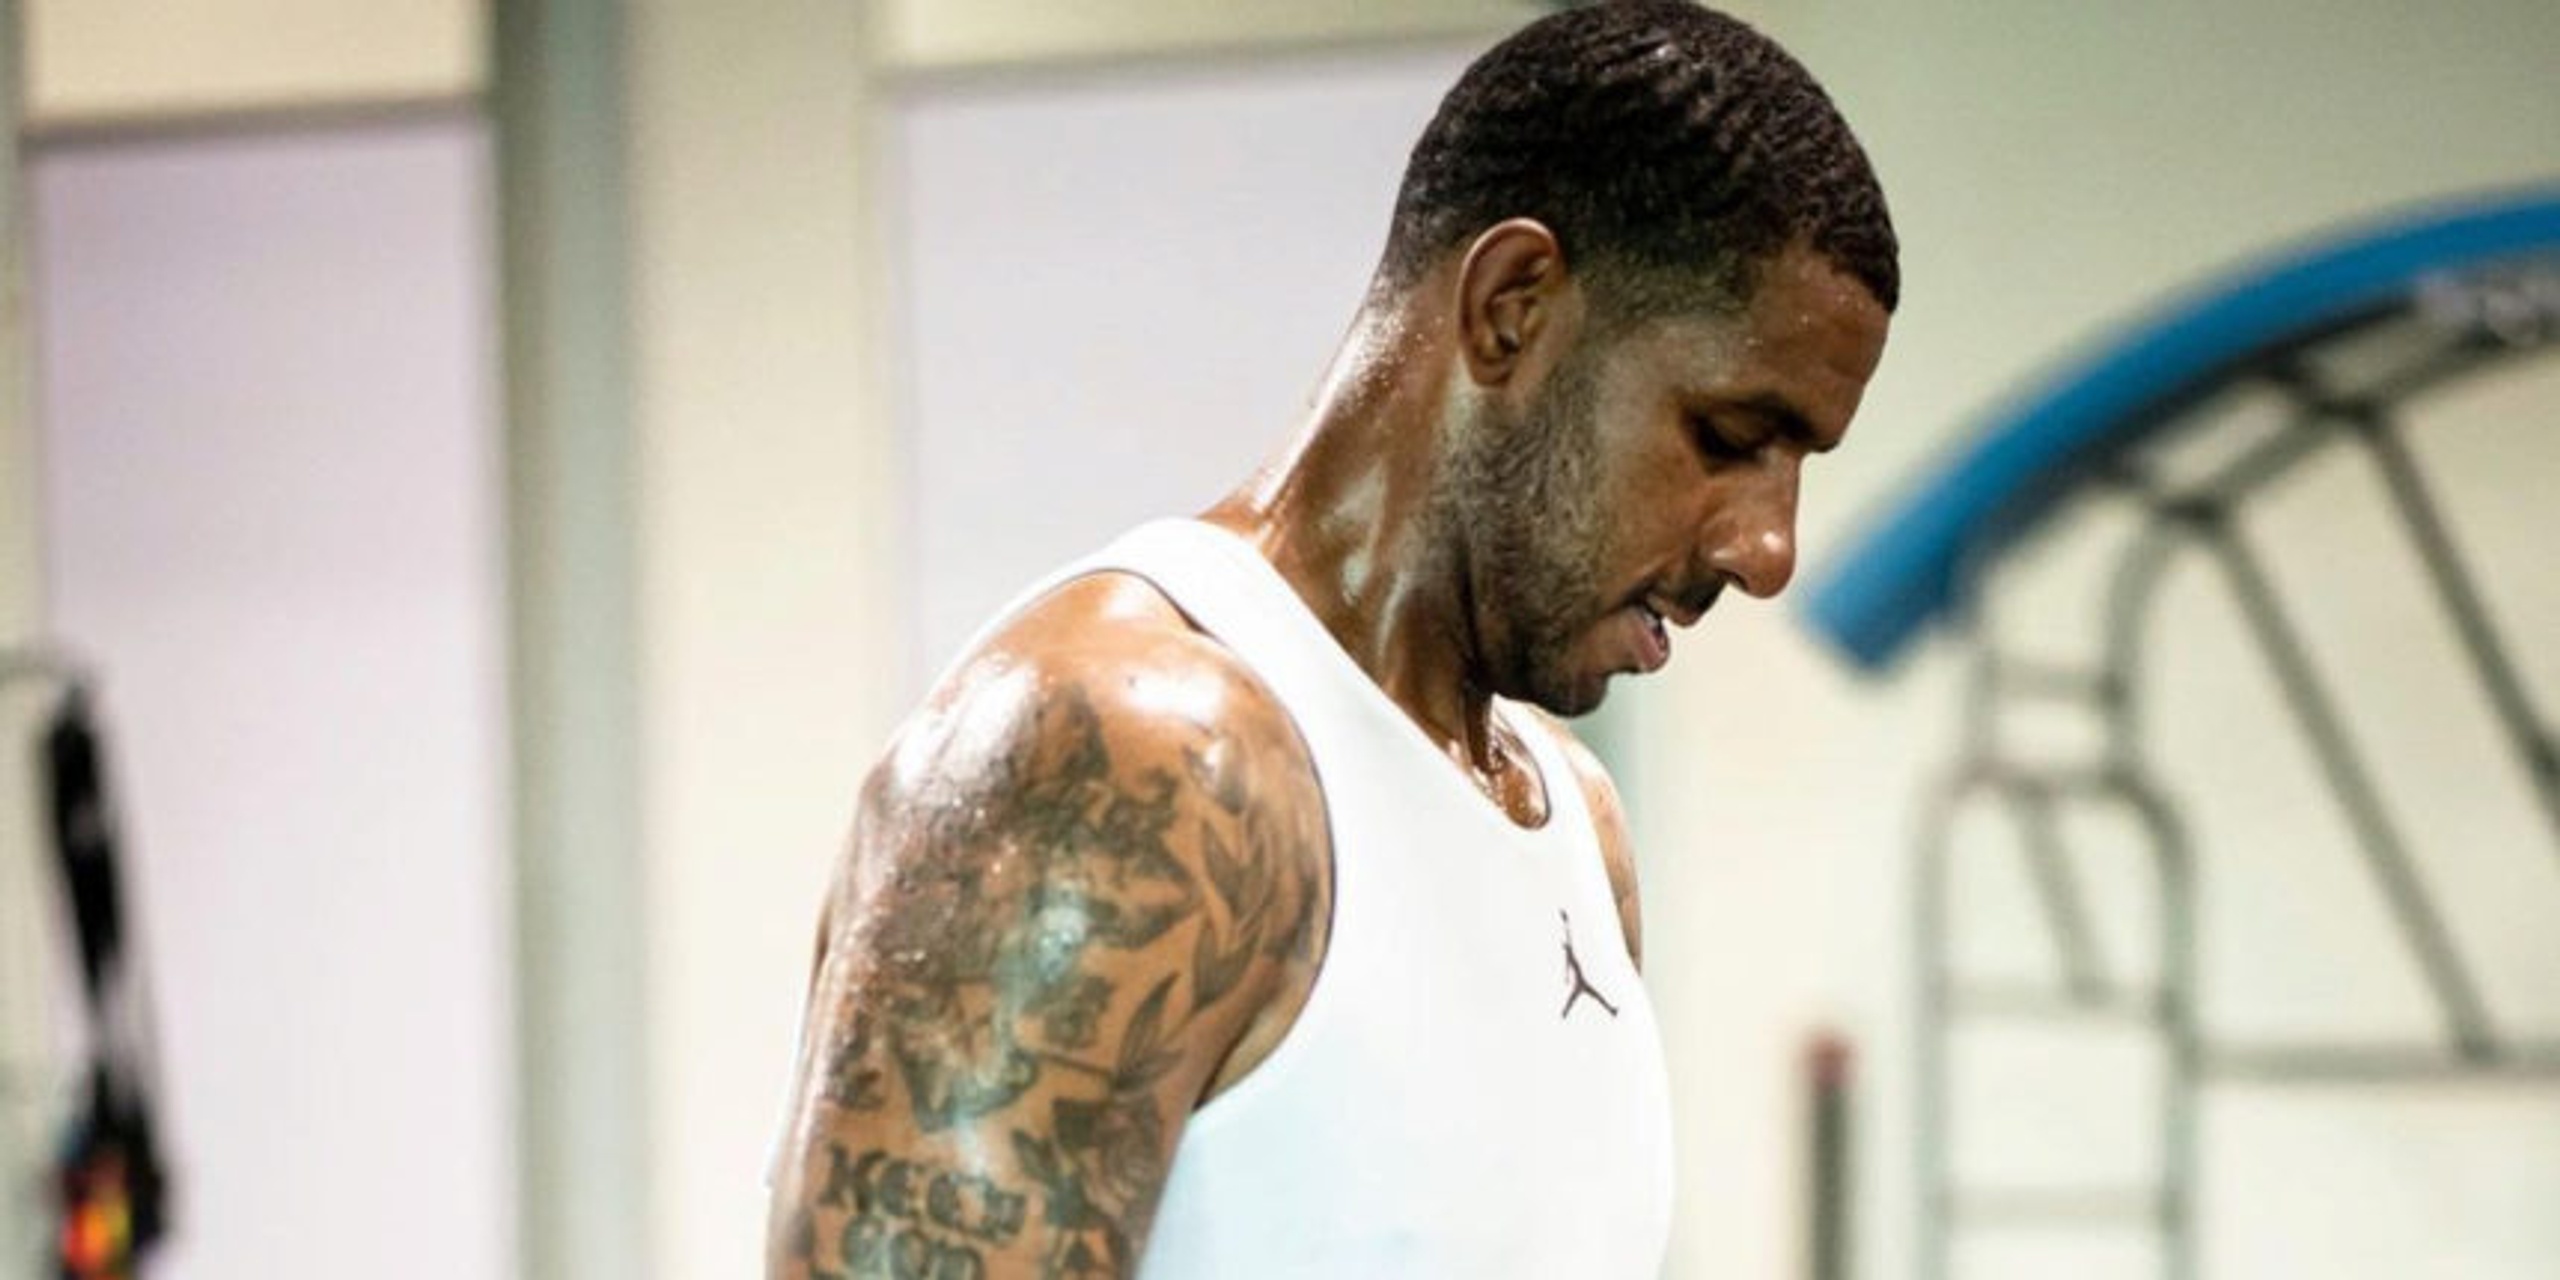 Dealing with WPW: Why LaMarcus Aldridge has more heart than most of us